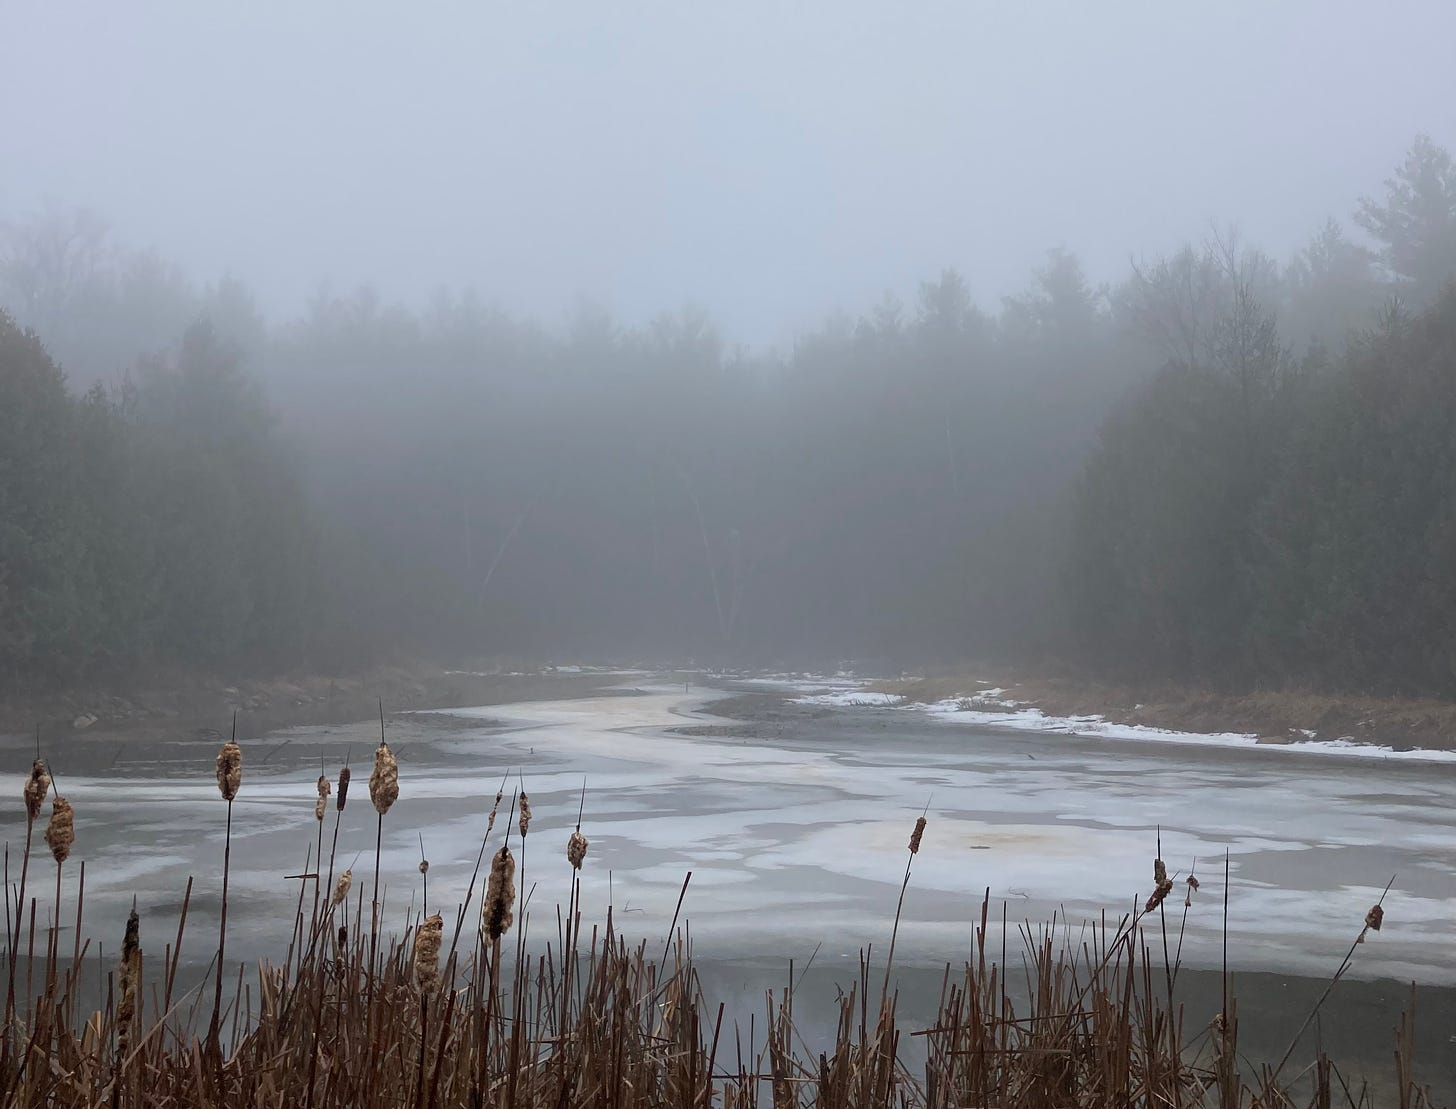 a misty pond swirled with melting ice, trees silhouetted in the mist behind it